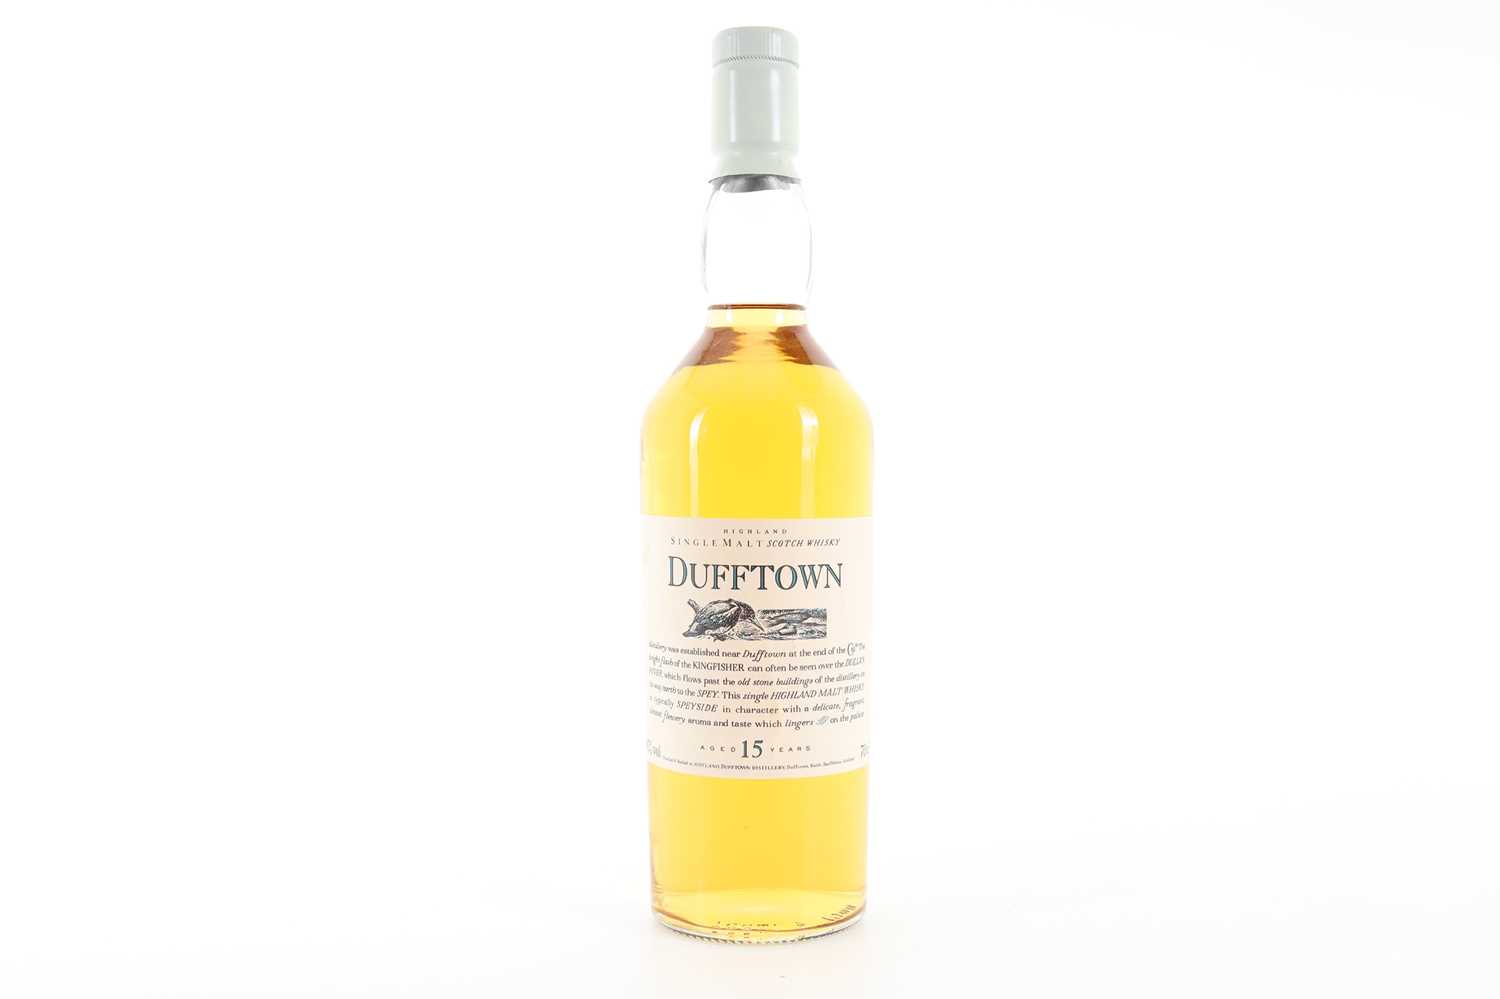 Lot 145 - DUFFTOWN 15 YEAR OLD FLORA & FAUNA FIRST EDITION